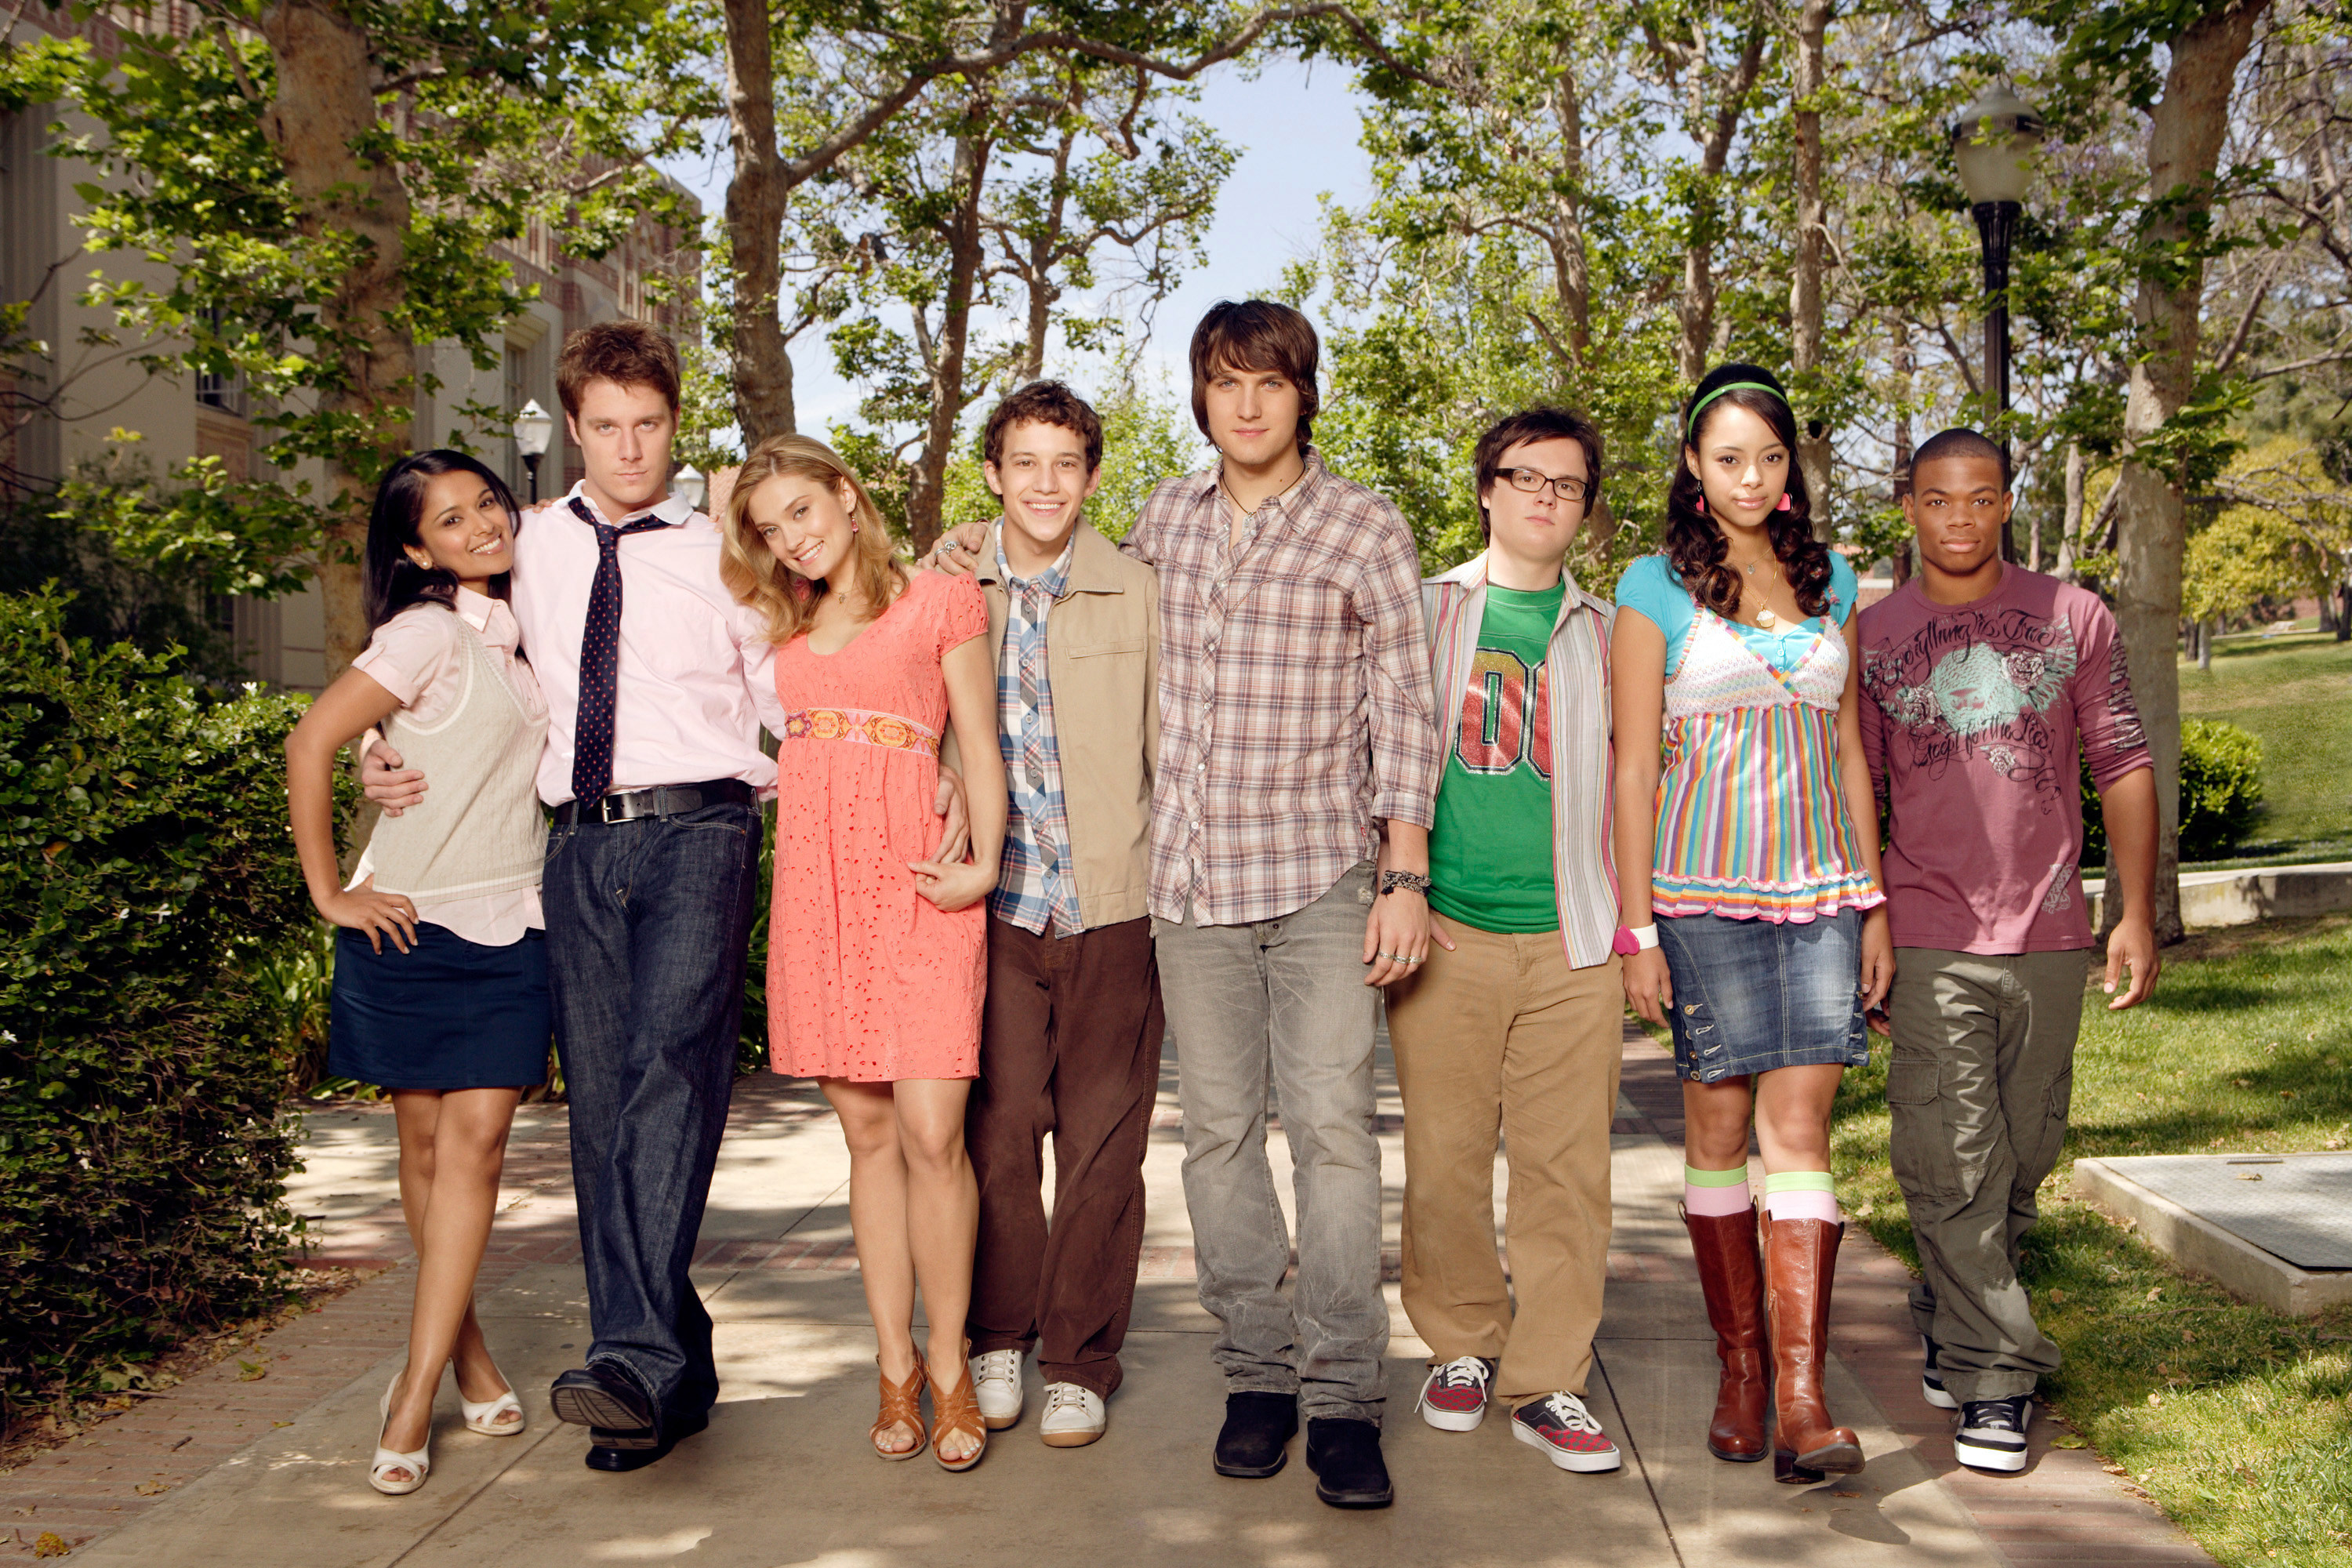 the cast posing on the campus